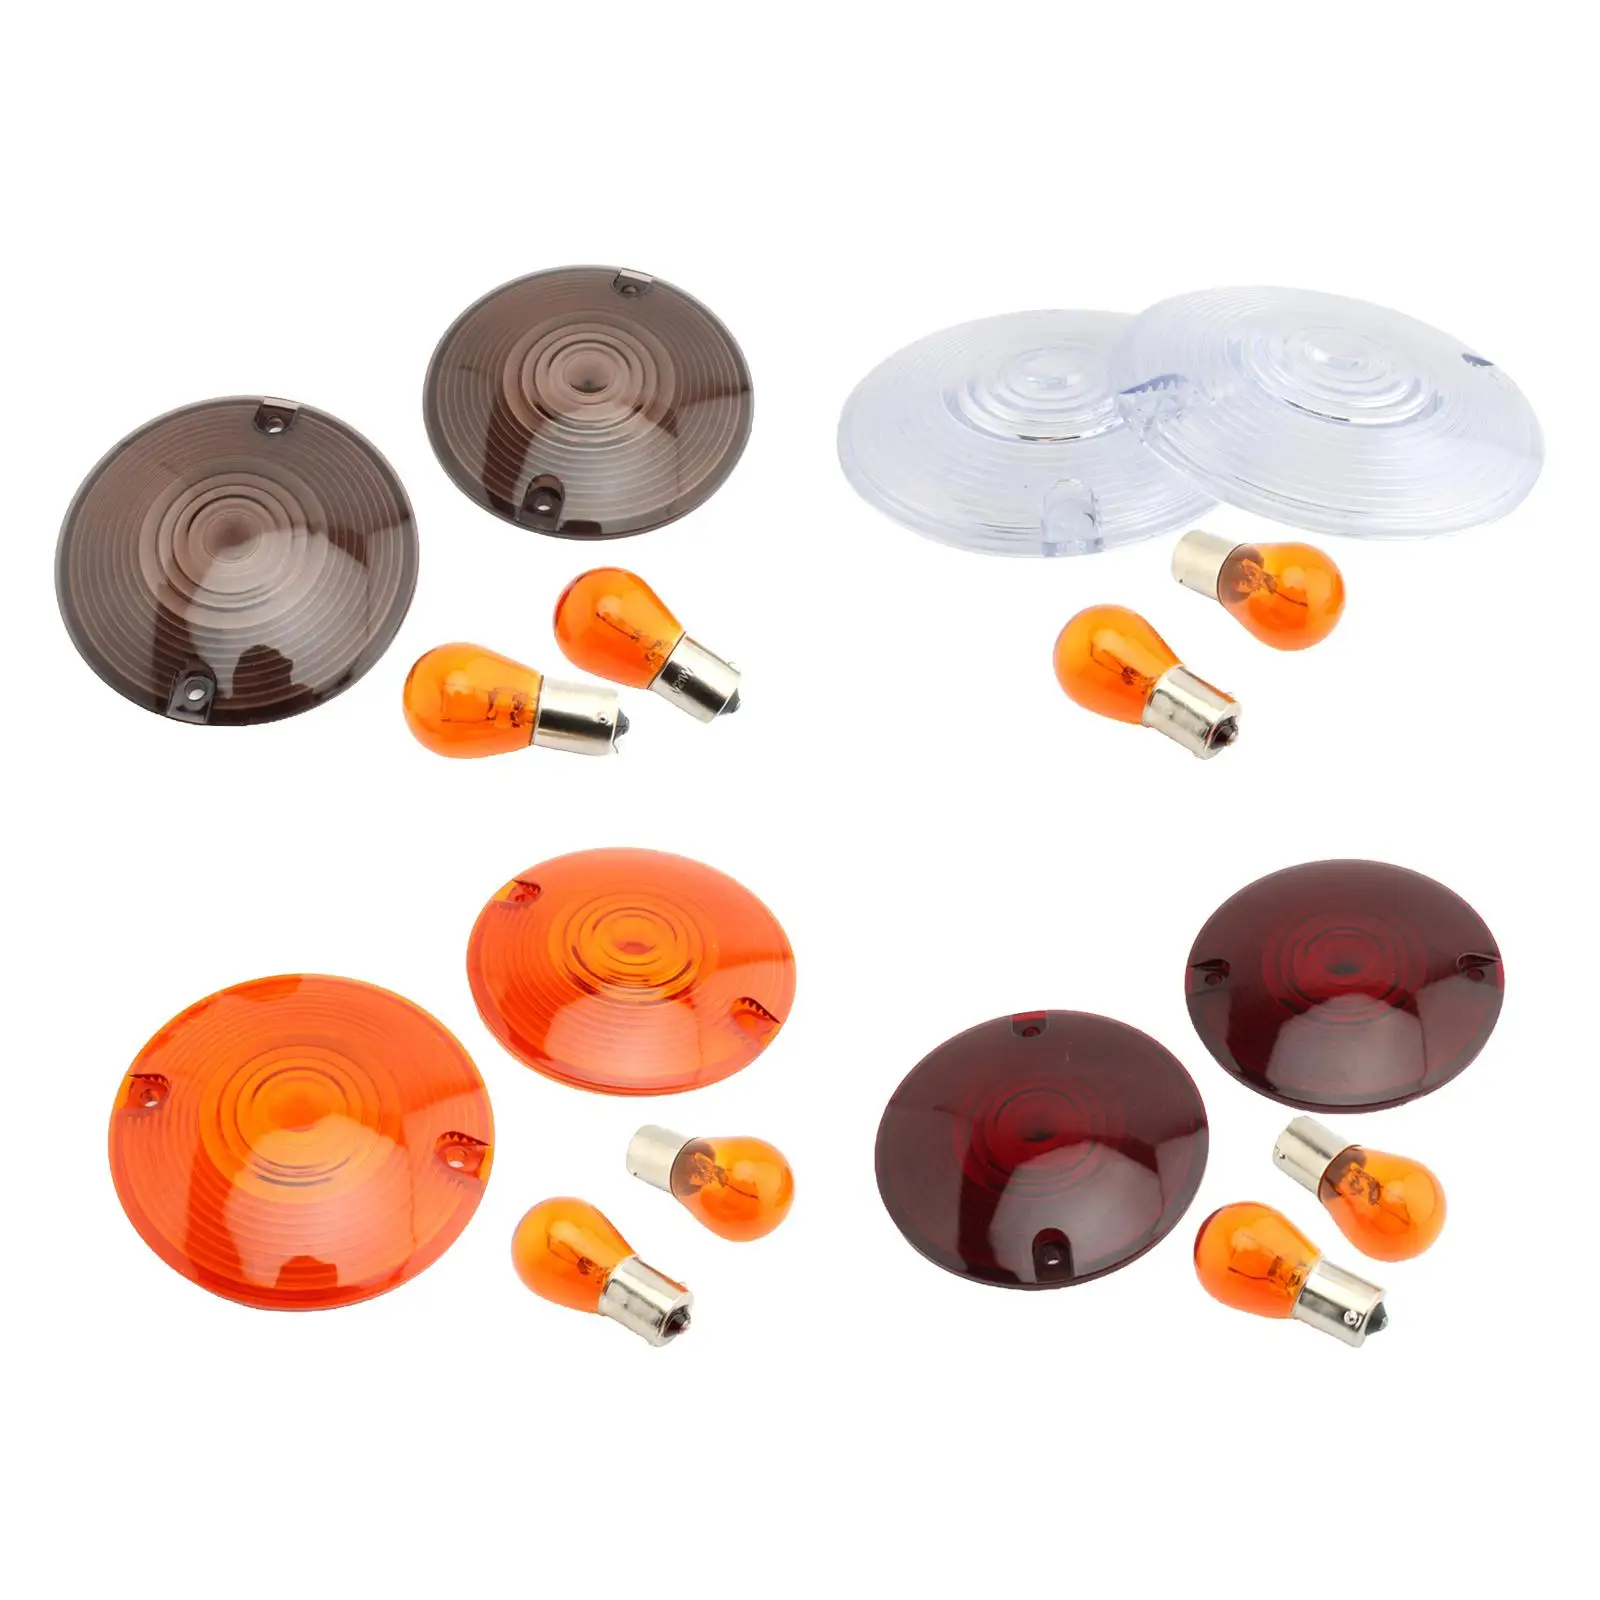 

Set of 2 3.25" Turn Signal Lenses Kit with Amber Bulb Fit for High Performance